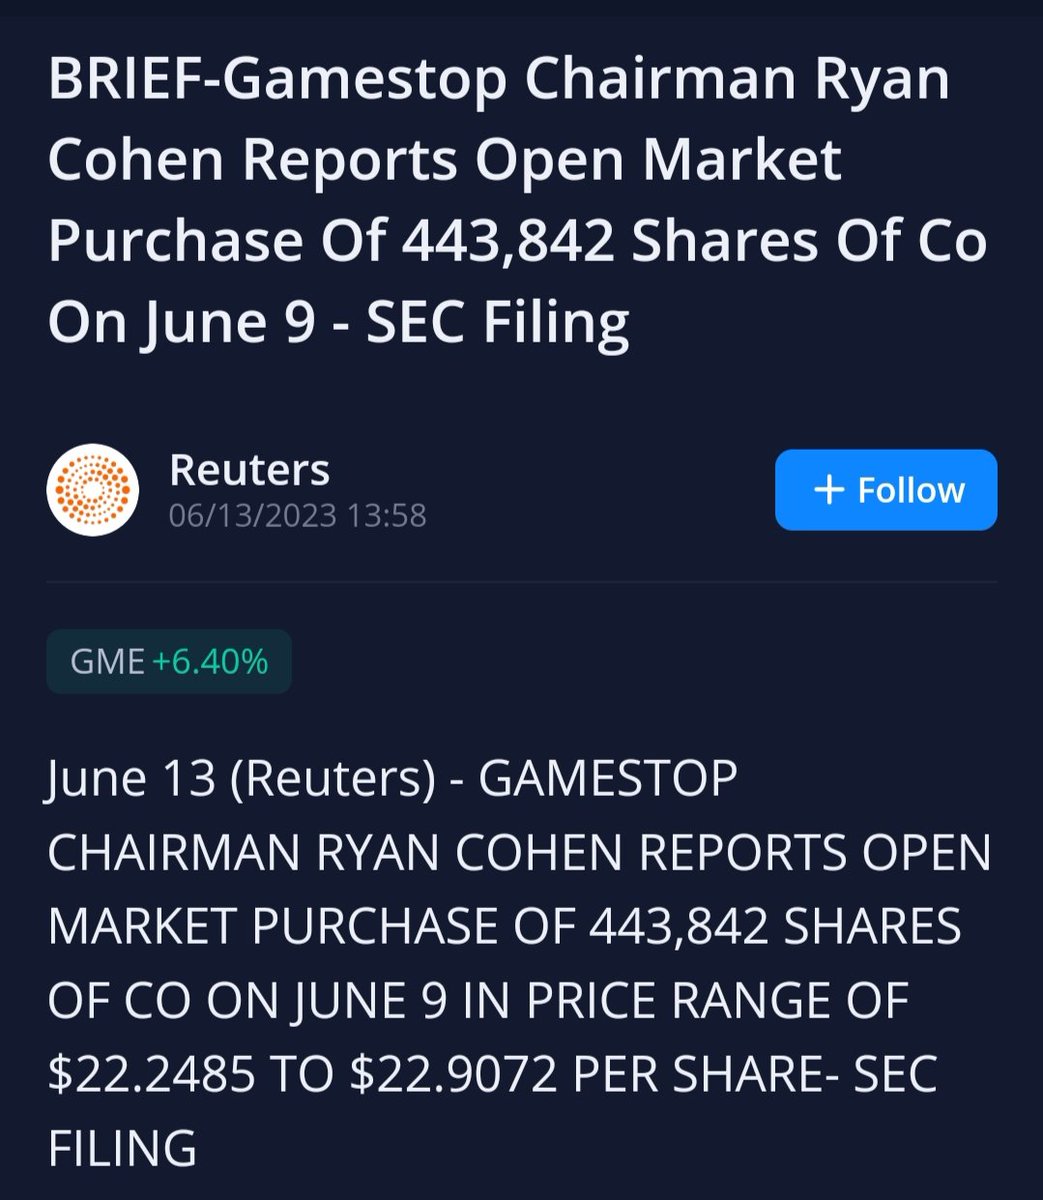 @ryancohen and the board buy shares @CEOAdam and the board sell shares and dilute the stock. See the difference? #AMCSTOCK #AMCNOTLEAVING #GME #AMCSqueeze #AMCNEVERLEAVING